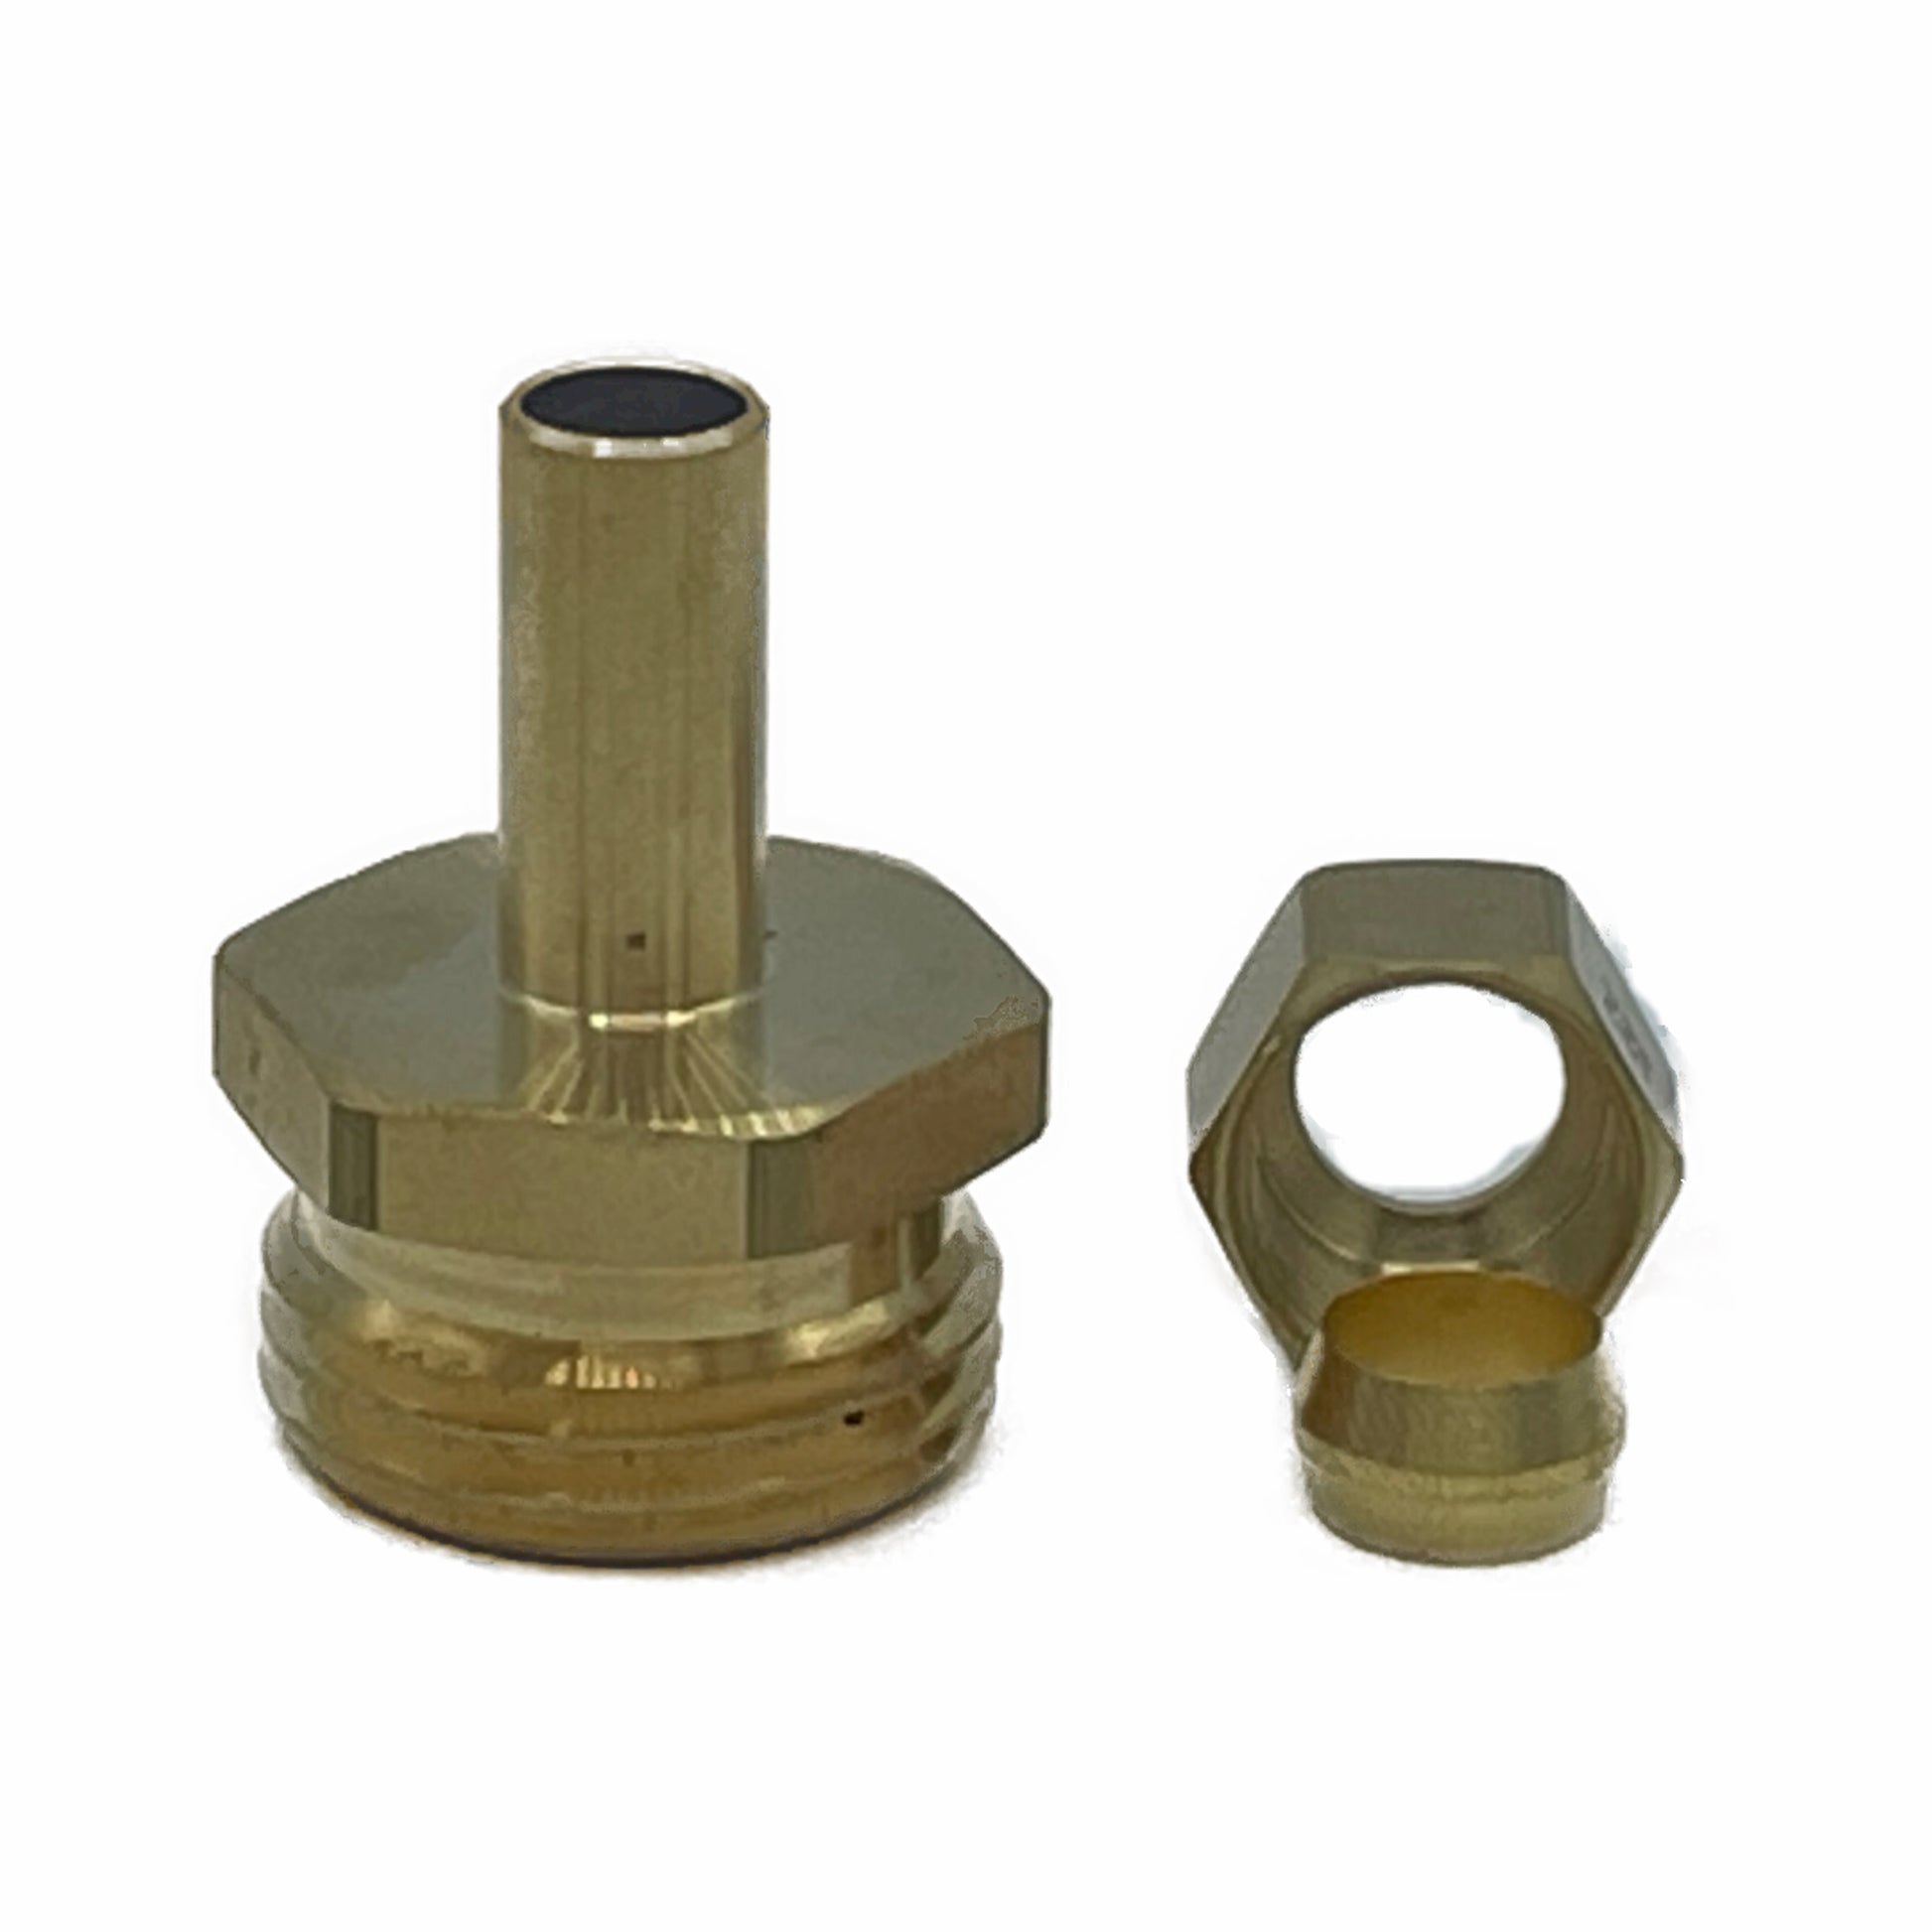 3/8" Stem pipe fitting, 3/8" brass compression ferrule, and 3/8" brass compression nut. Connects into a 3/8" water supply shutoff valve. 